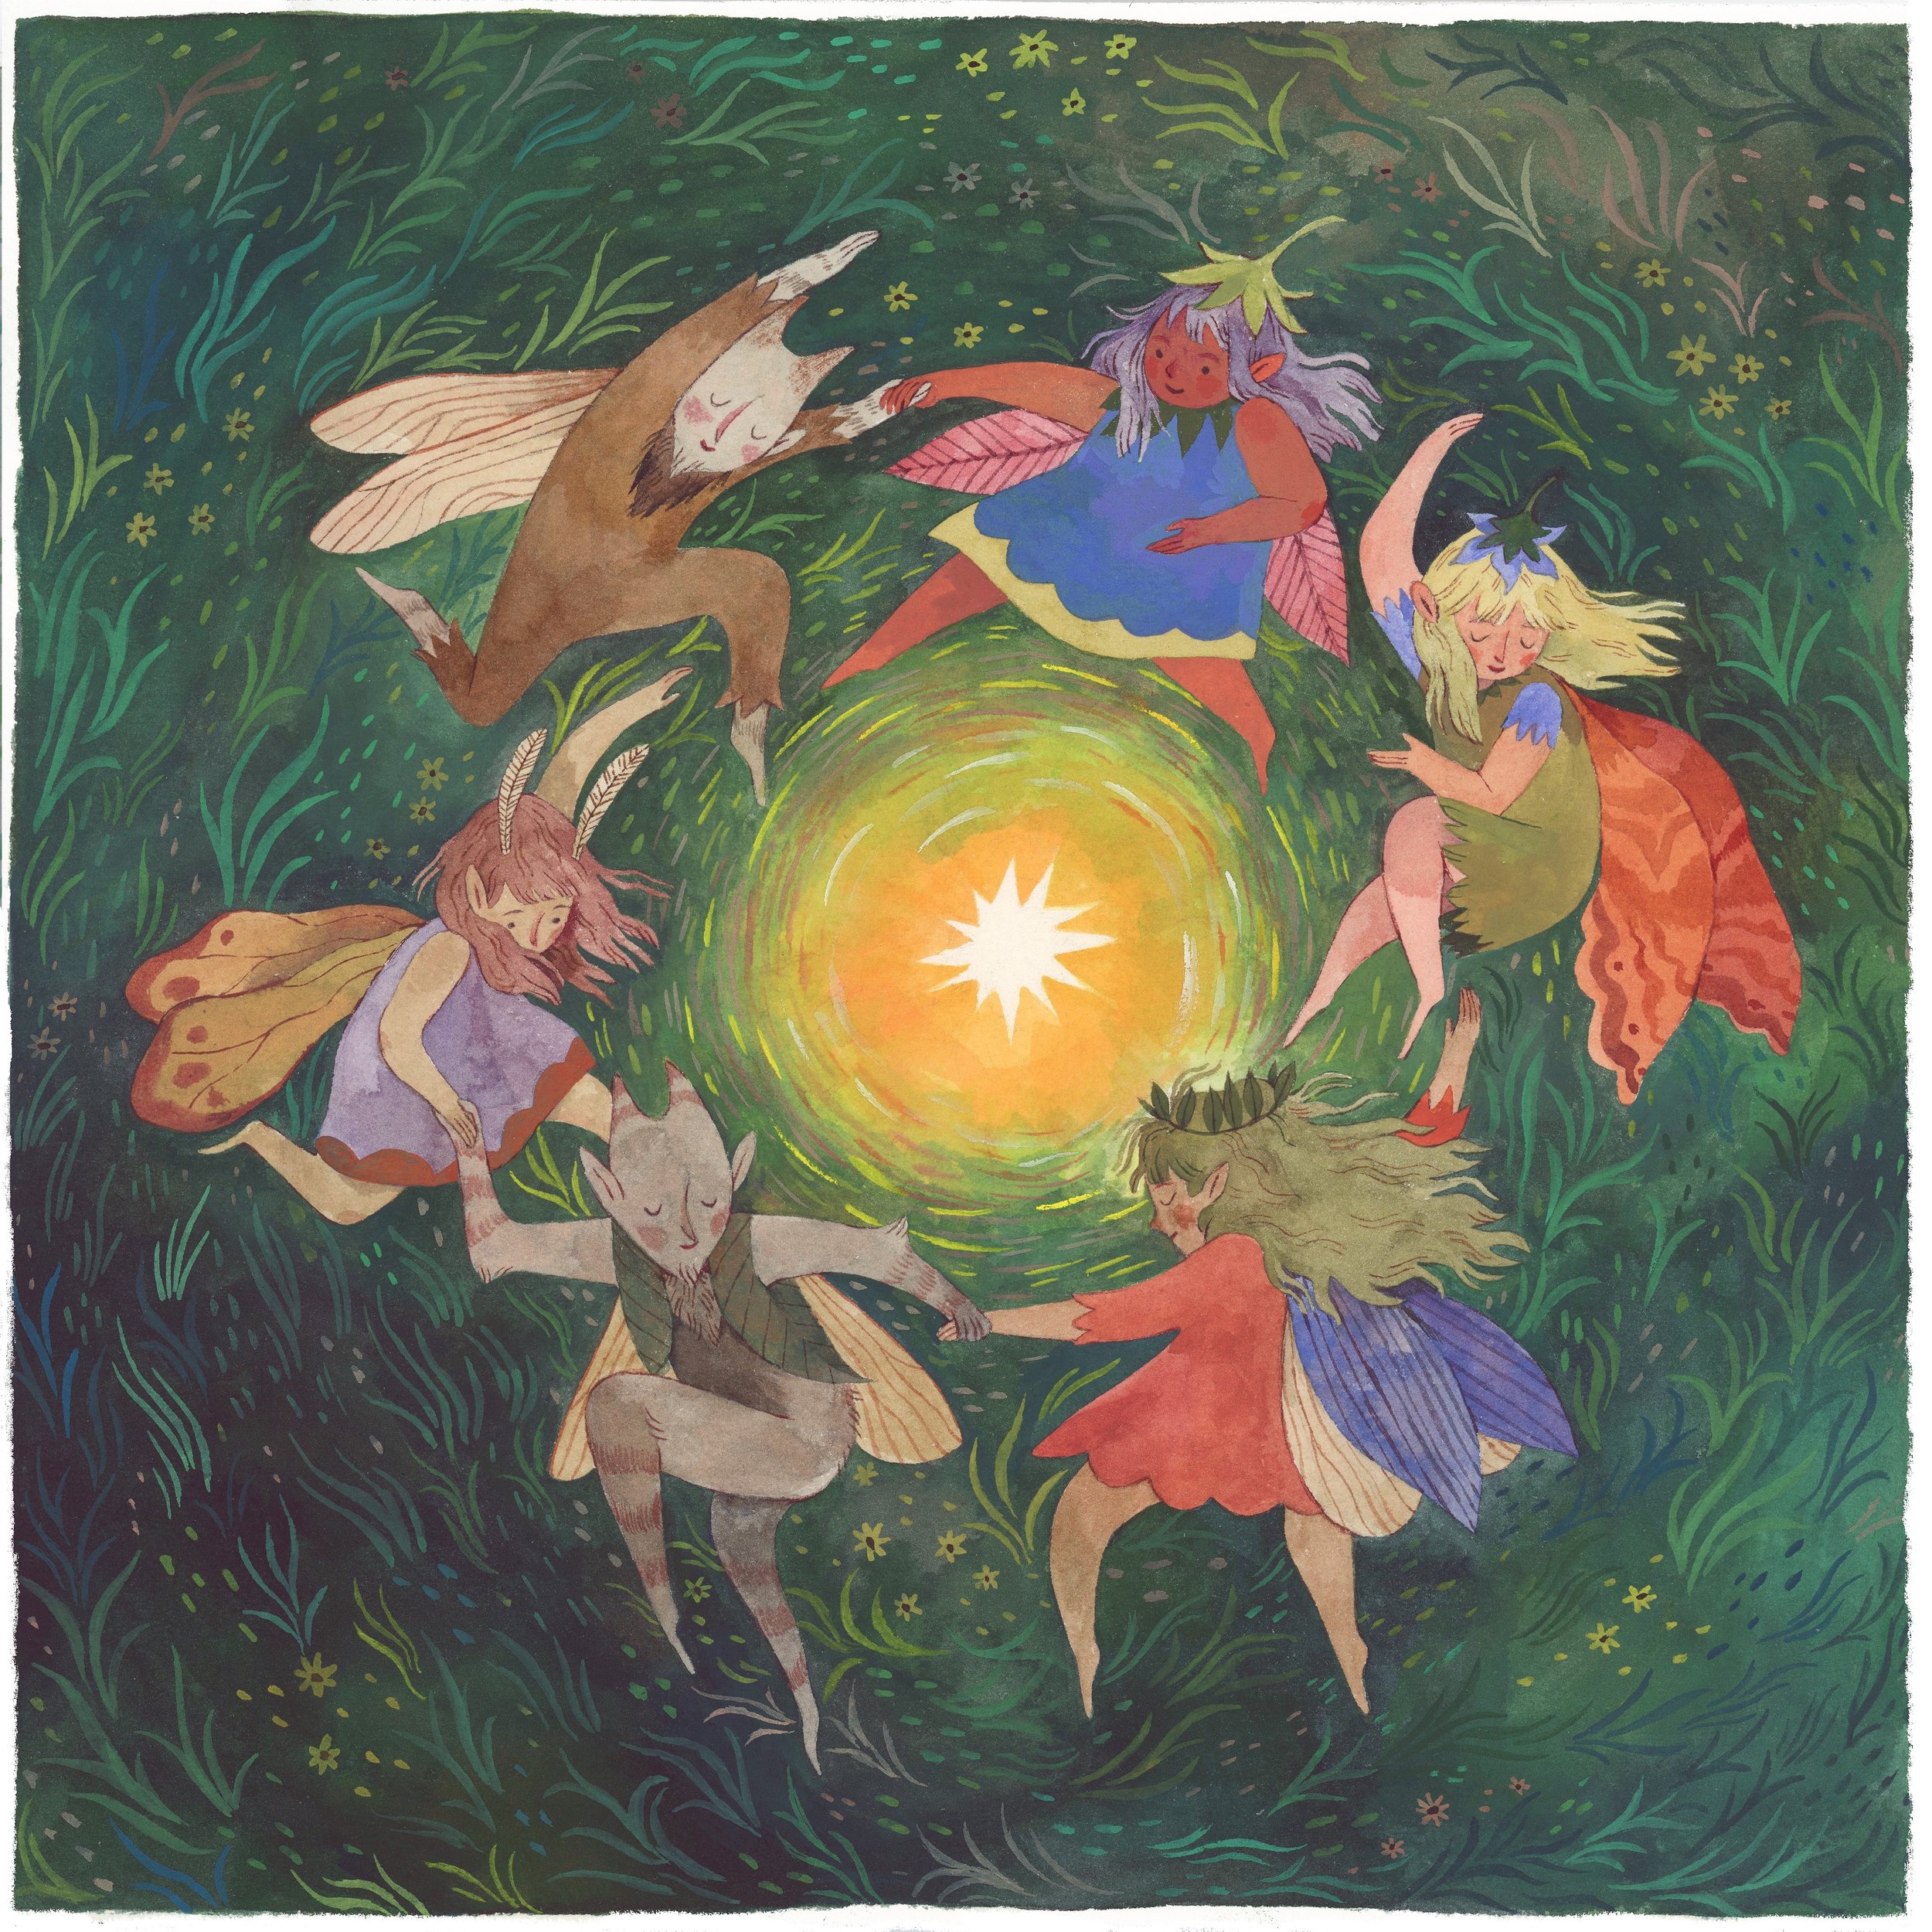 🌟dance of the May fairies🌟
Happy MAY DAY, folks! Let this be the month of playing outside to your hearts content and overall just having a silly ol&rsquo; time. Remember to leave out offerings of clover honey and dandelion bread for the fairies, th